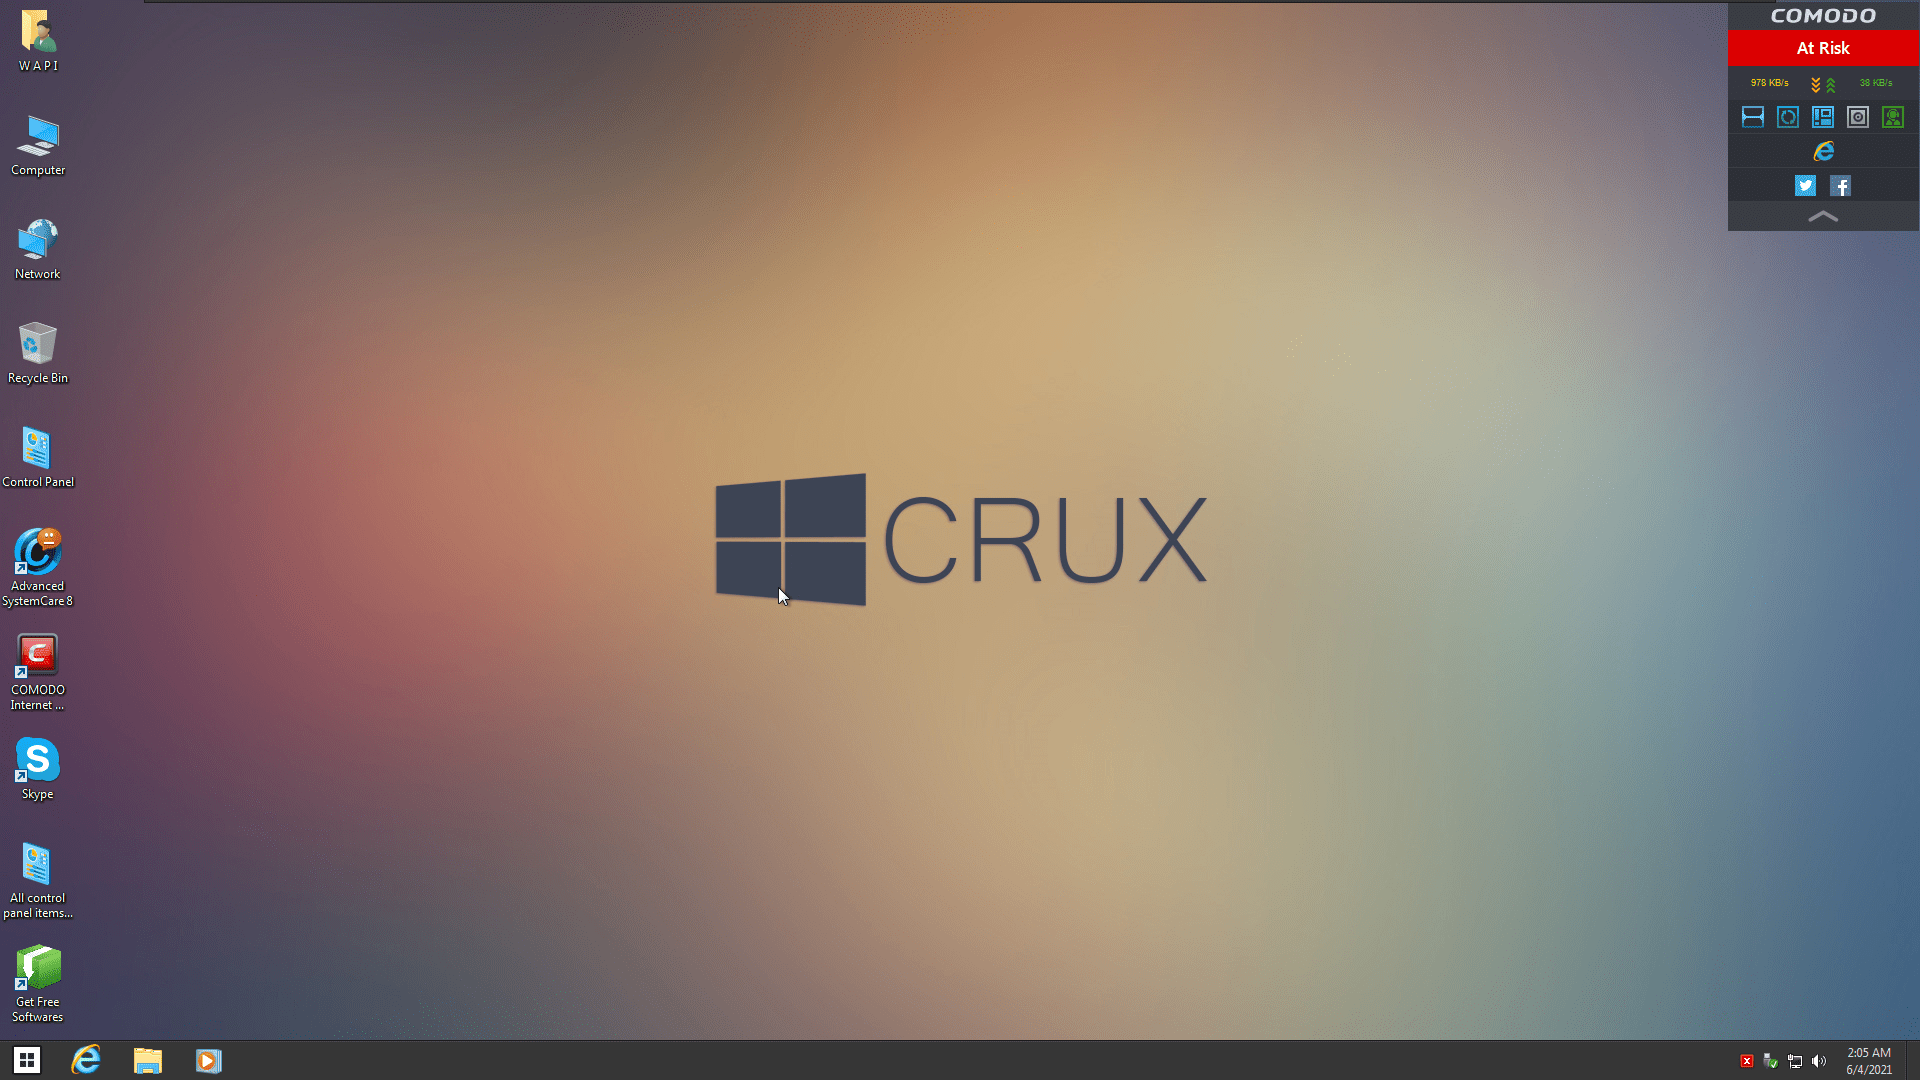 Download Windows 7 Crux Edition ISO Full Version